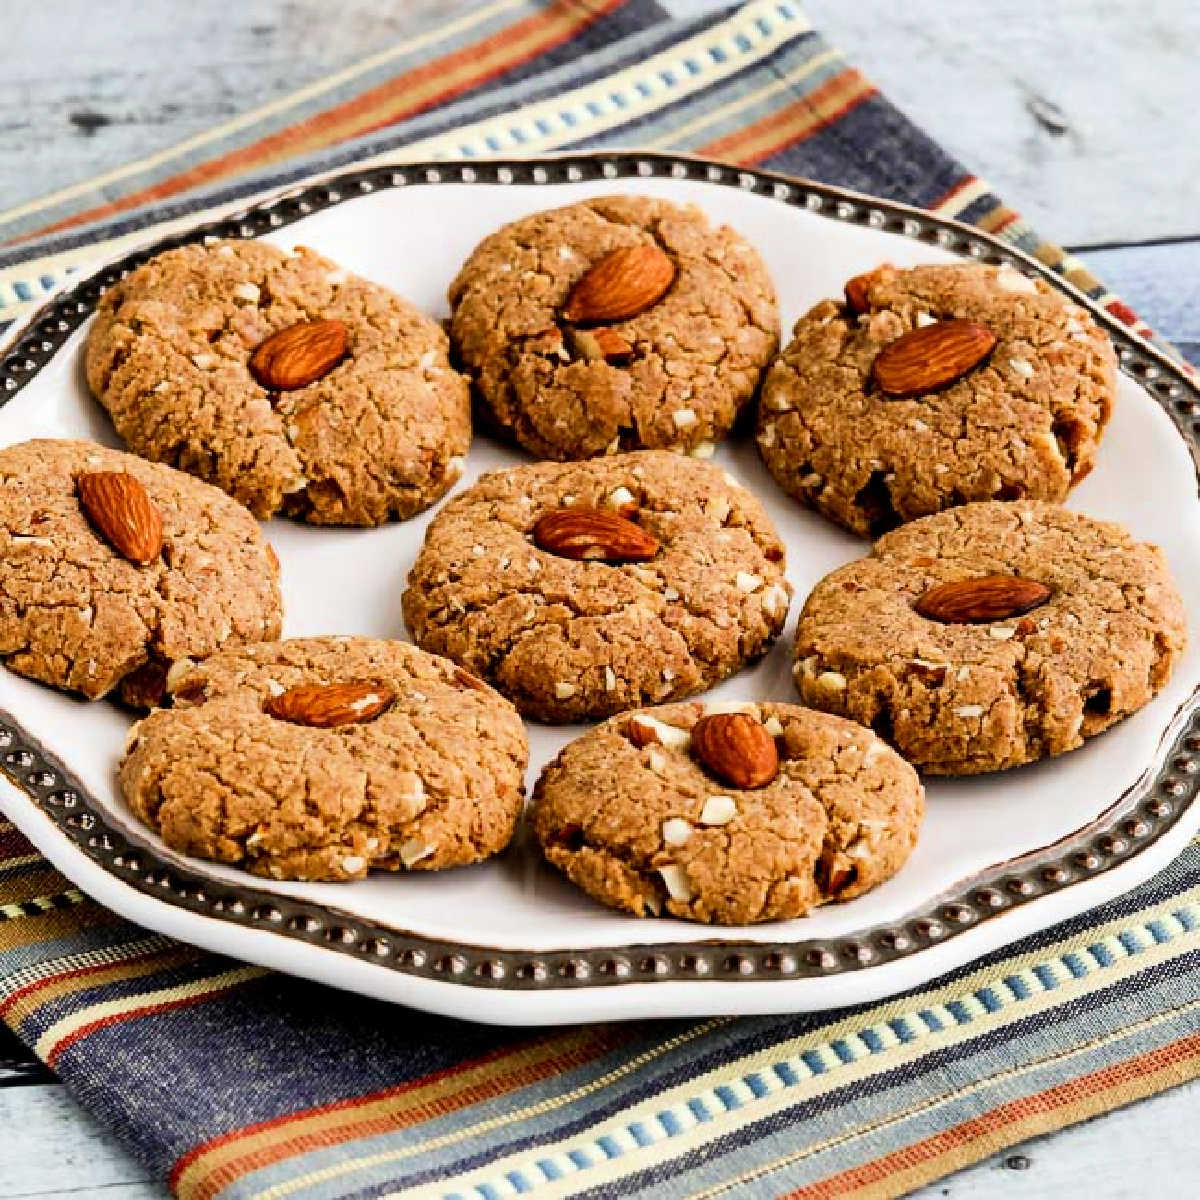 Square image for Sugar-Free Gluten-Free Almond Cookies shown on serving plate.